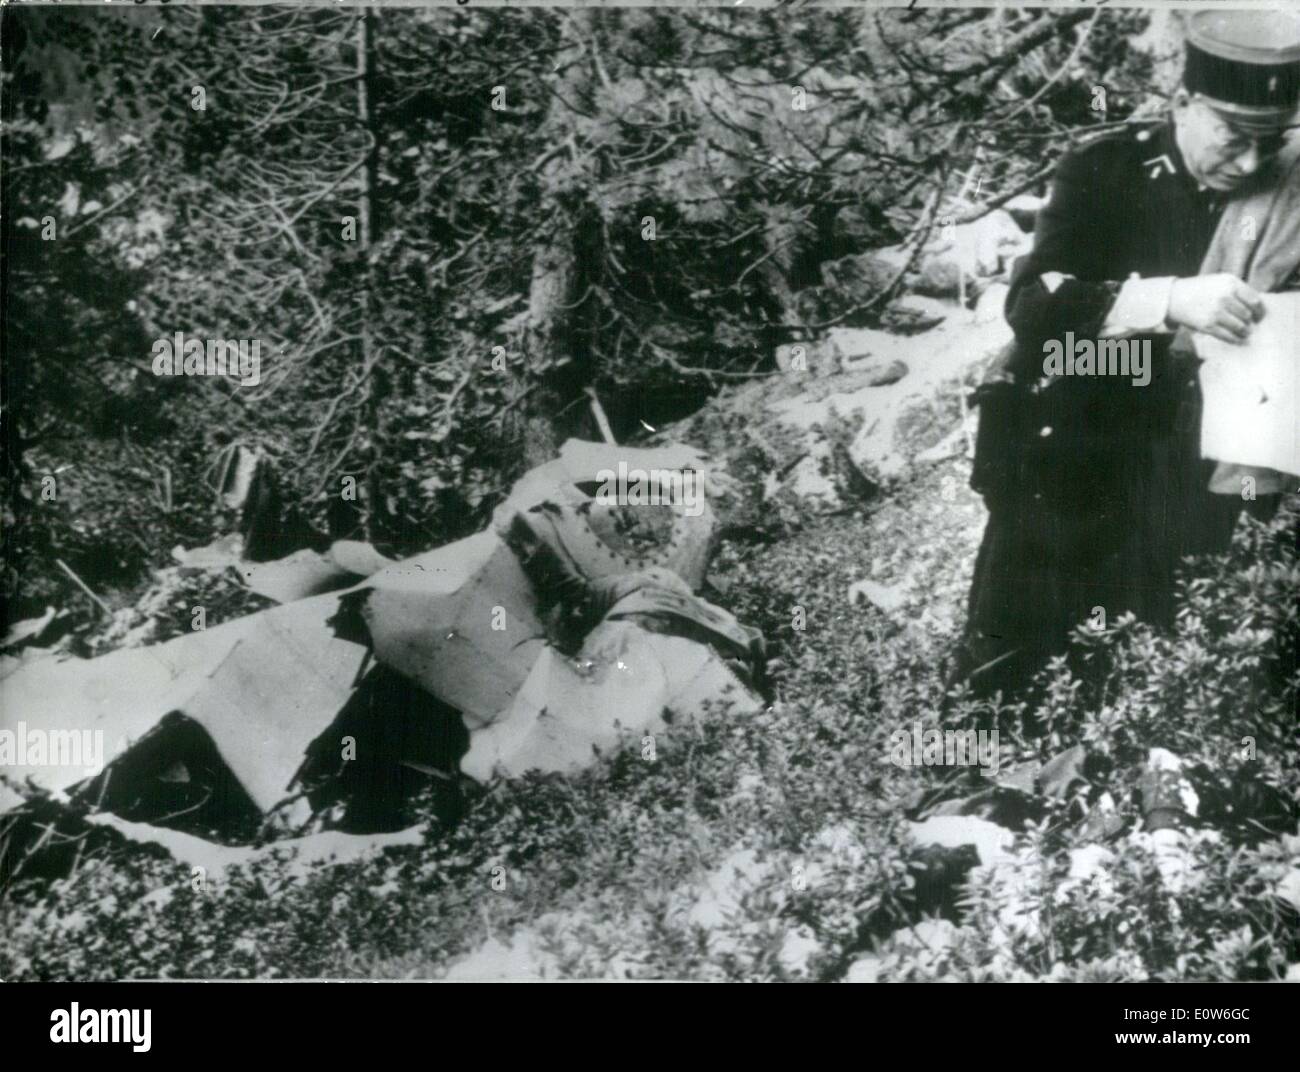 Oct. 10, 1961 - 34 Die as holiday plane hits Pyreness peak: 31 passengers and 3 members of the crew were killed when a Dakota on a charter flight from Gatwick crashed in the Pyrness yesterday. All the passengers were on their way to holidays on the Costa Brava. Photo Shows The wreckage of the plane. In the Foreground a Gerndarme examining different objects found among the wreckage. Stock Photo